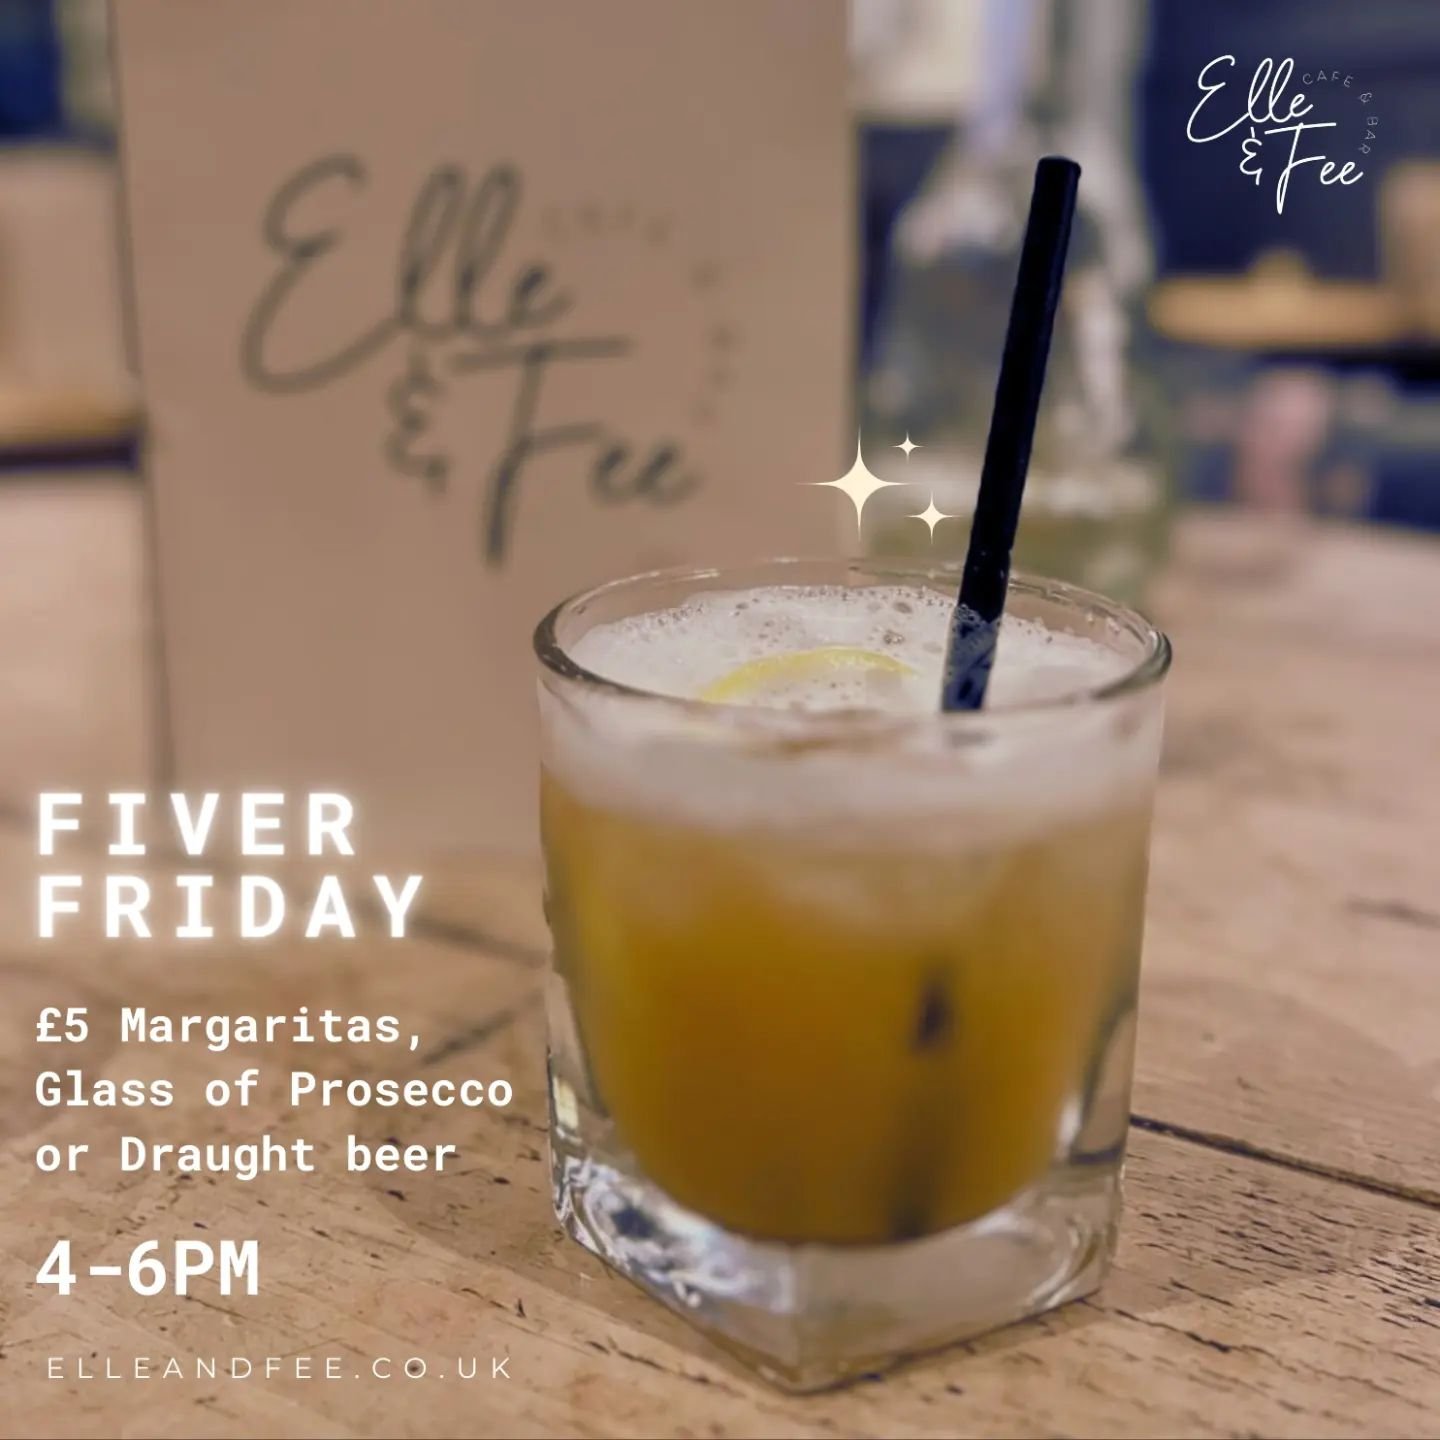 It's the weekend! Come on down and try one with friends and family. 

Don't forget our Friday offer - Fiver Fridays! &pound;5 MARGARITAS, GLASS OF PROSECCO OR DRAUGHT BEER 4-6PM!

#surreyrestaurant #surreycafe #surreybrunch #ashfordsurrey #supportloc